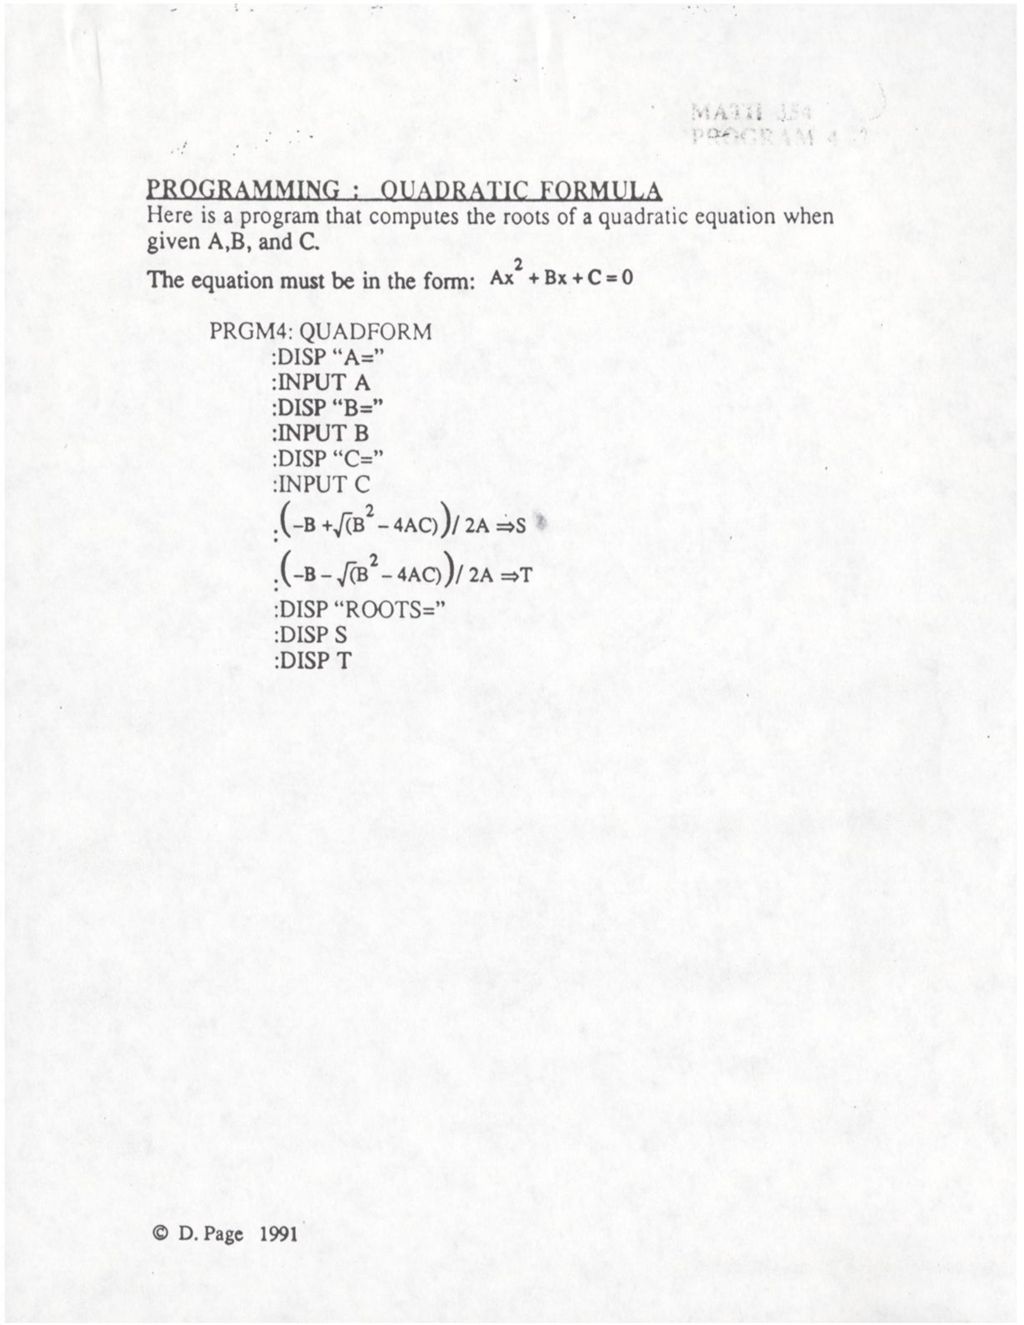 Programming: Quadratic Formula w/ Page note about a new version of the same program for TI-81 calculator